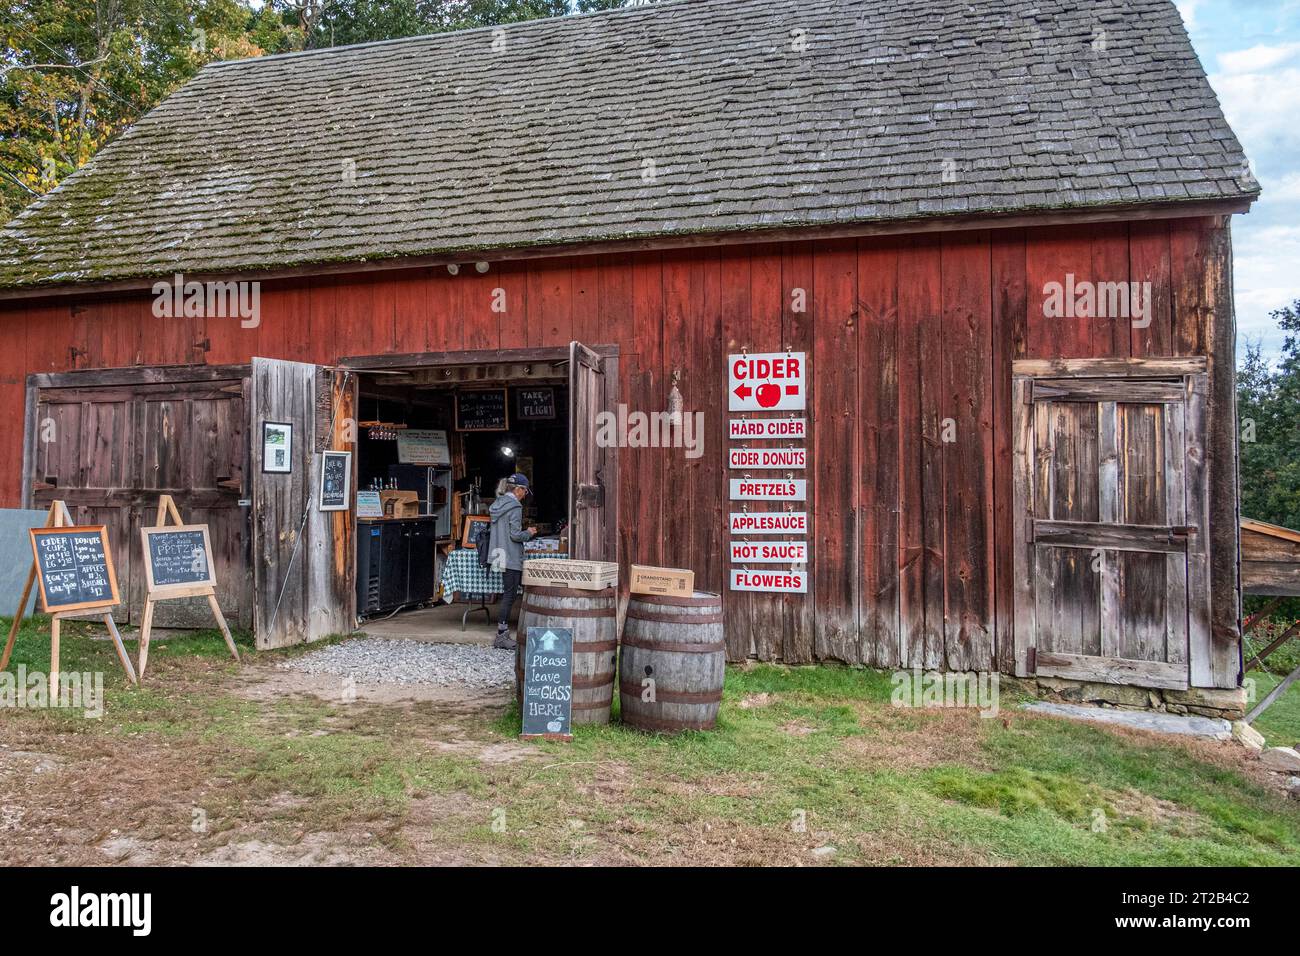 New Salem farm that sells home made cider using apples from their orchard Stock Photo